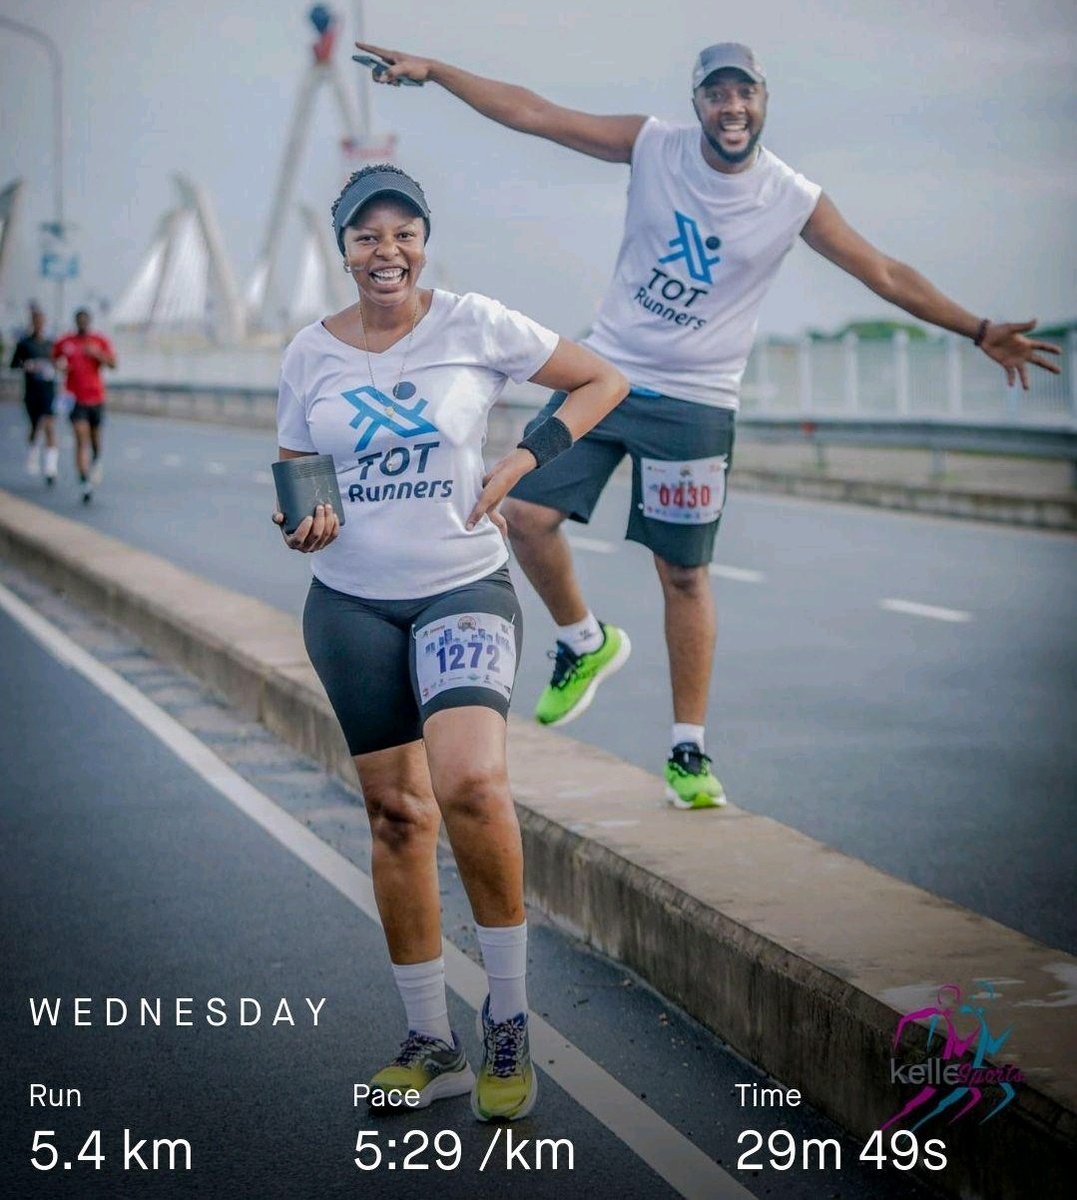 W E D N E S D A Y
Done with 5.4Km #EveningRun 

Powered by @JustFittz 
#TOTRunners
#FetchYourBody2024 
#RunningWithTumiSole 
#IPaintedMyRun